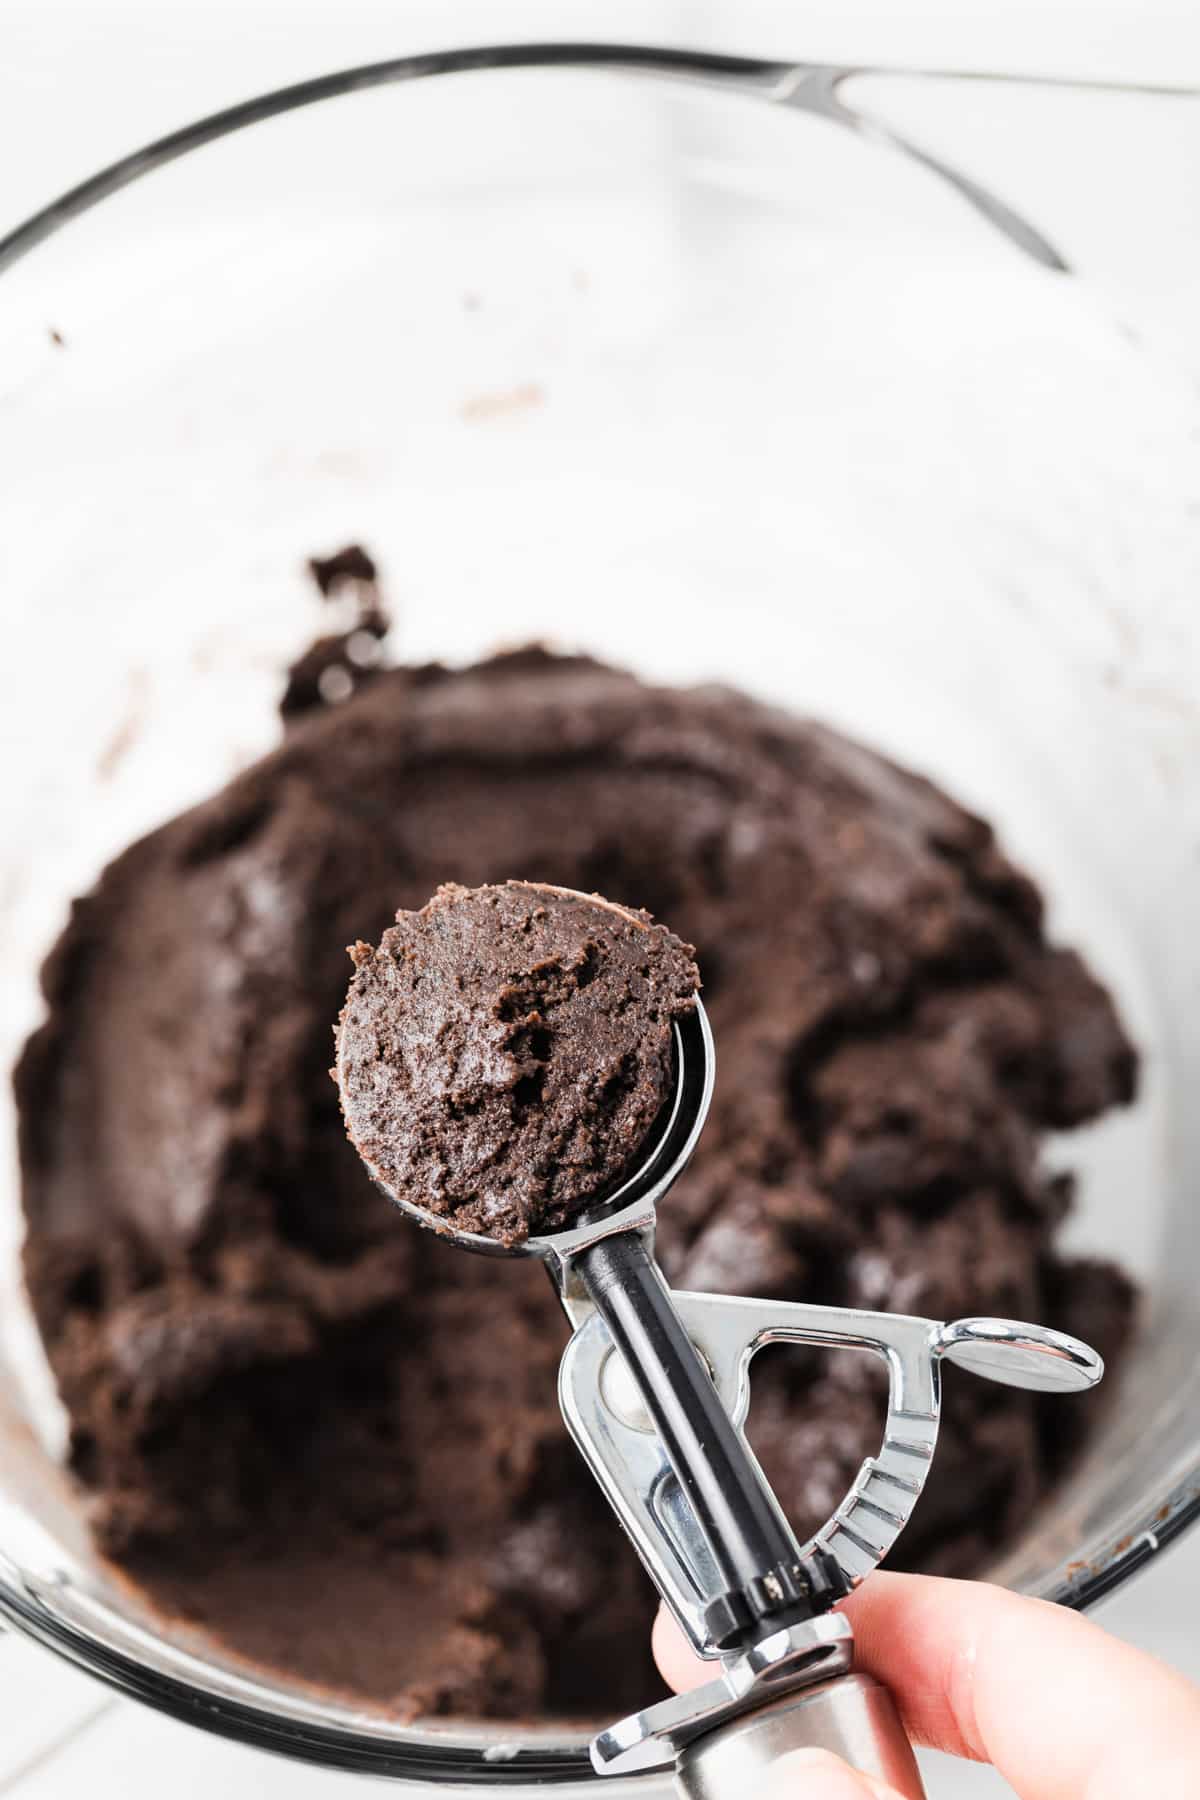 Oreo dough scooped with cookie scoop.